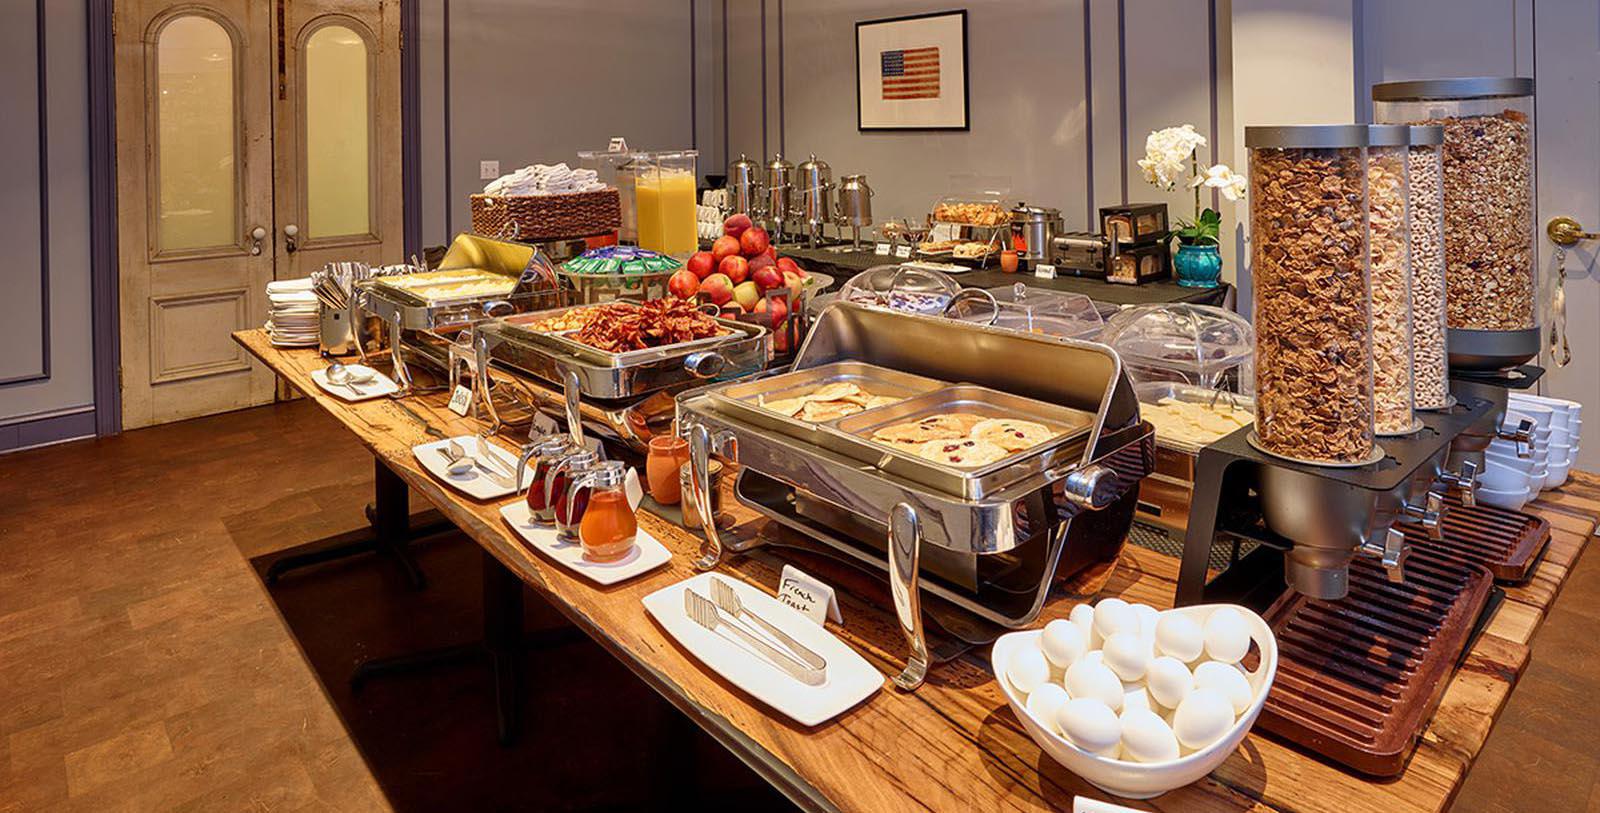 Image of Continental Breakfast The Kendall Hotel, 1894, Member of Historic Hotels of America, in Cambridge, Massachusetts, Explore